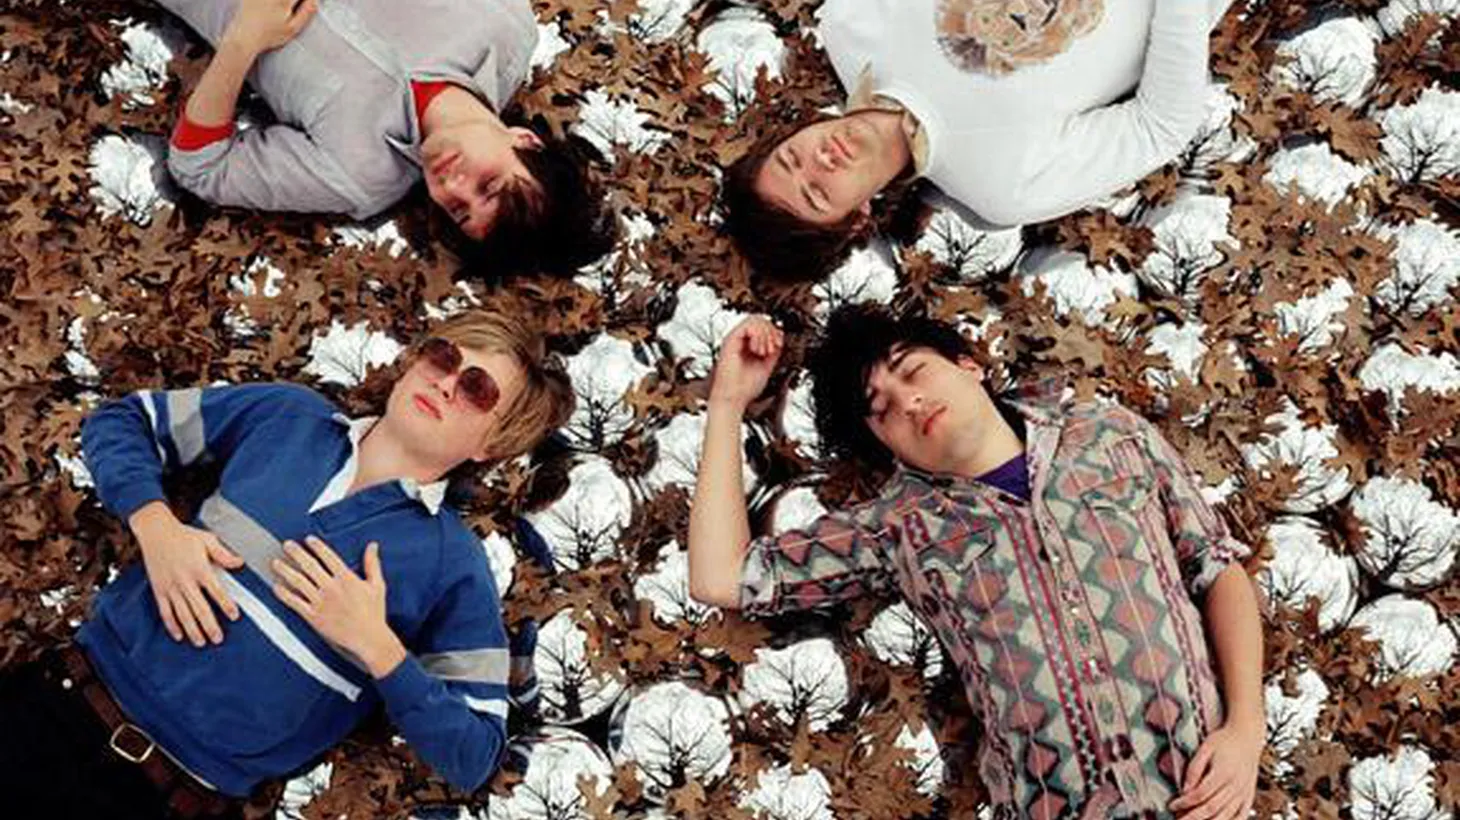 Grizzly Bear might be the standard-bearers of the Brooklyn indie-rock explosion of the 2000s. Their album “Veckatimest” topped plenty of critical year-end lists in 2009 and showcased their knack for sophisticated, melodic songwriting.